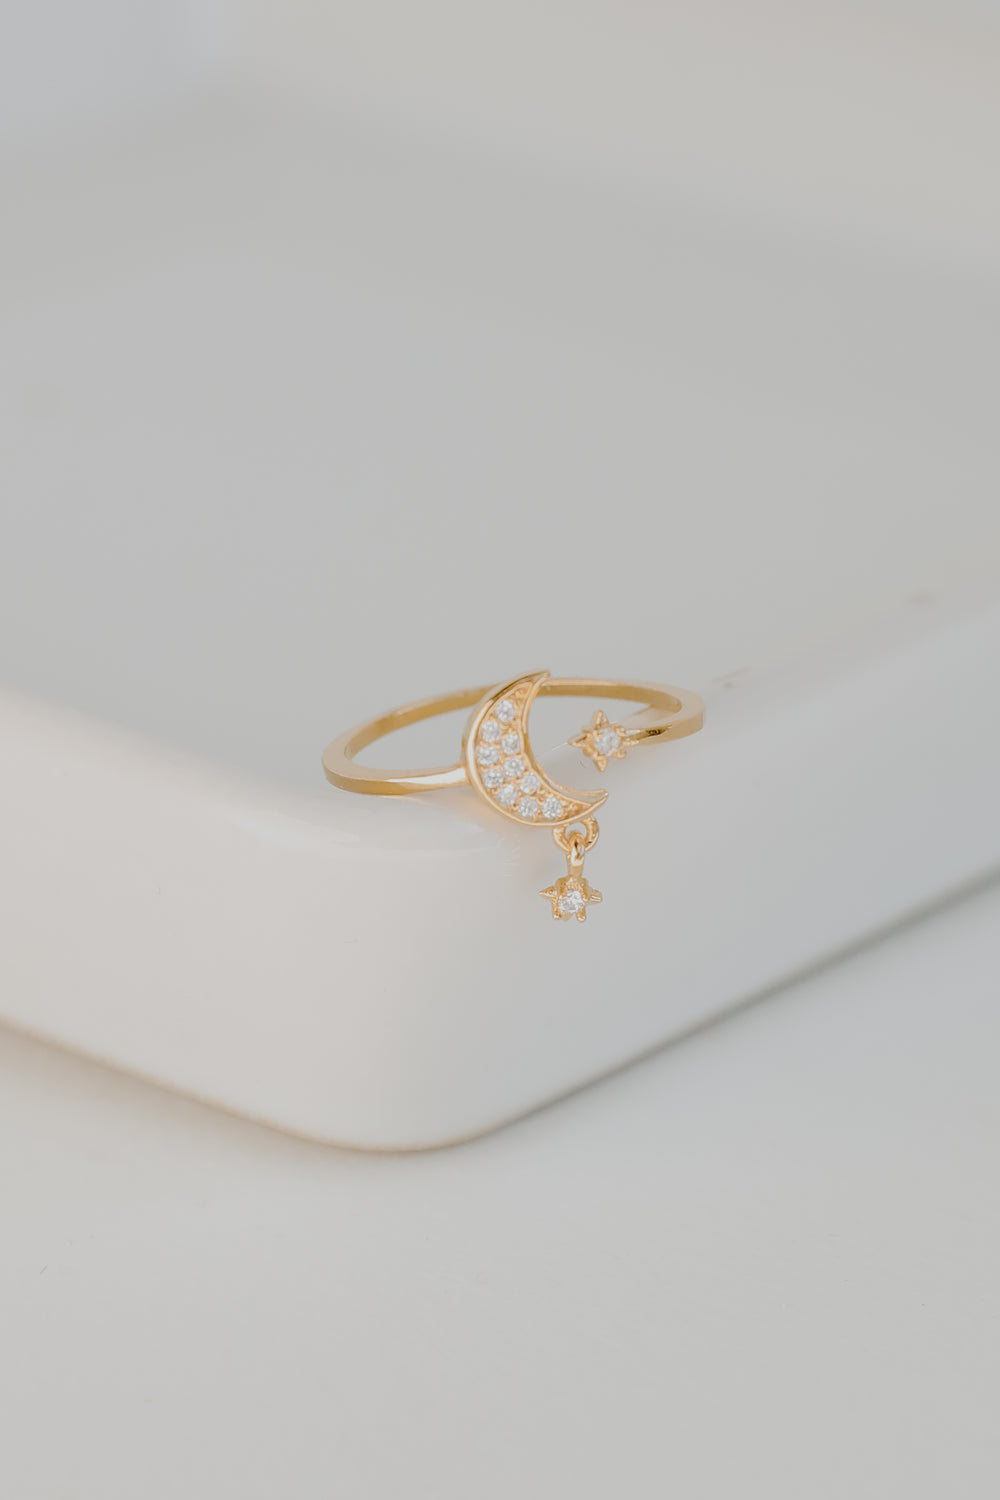 Gold Rhinestone Star + Moon Ring from dress up